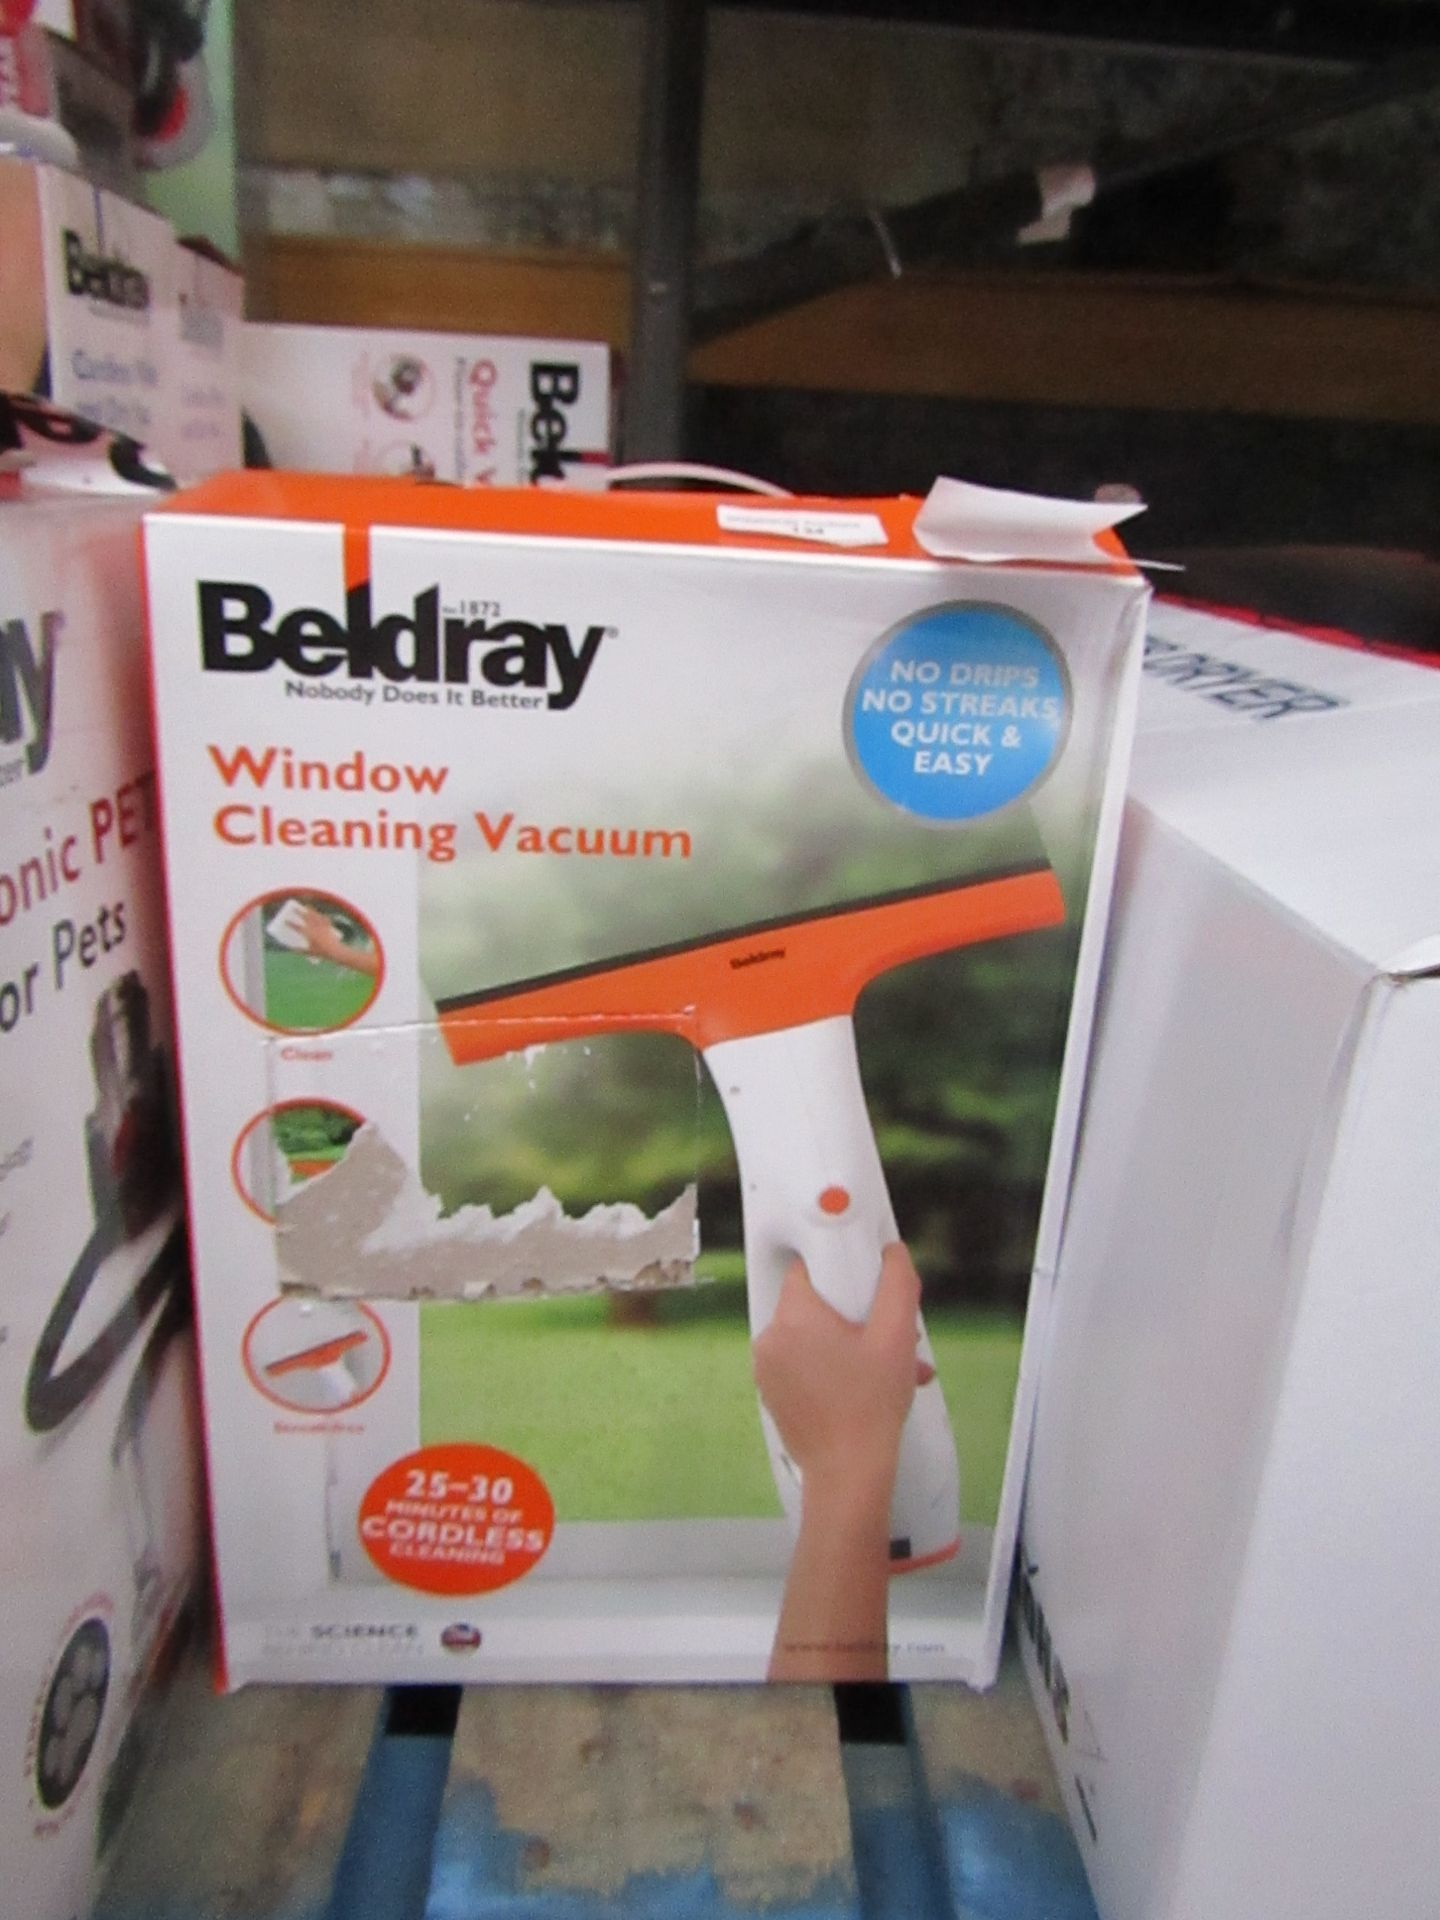 Beldray window cleaning vacuum   boxed and unchecked